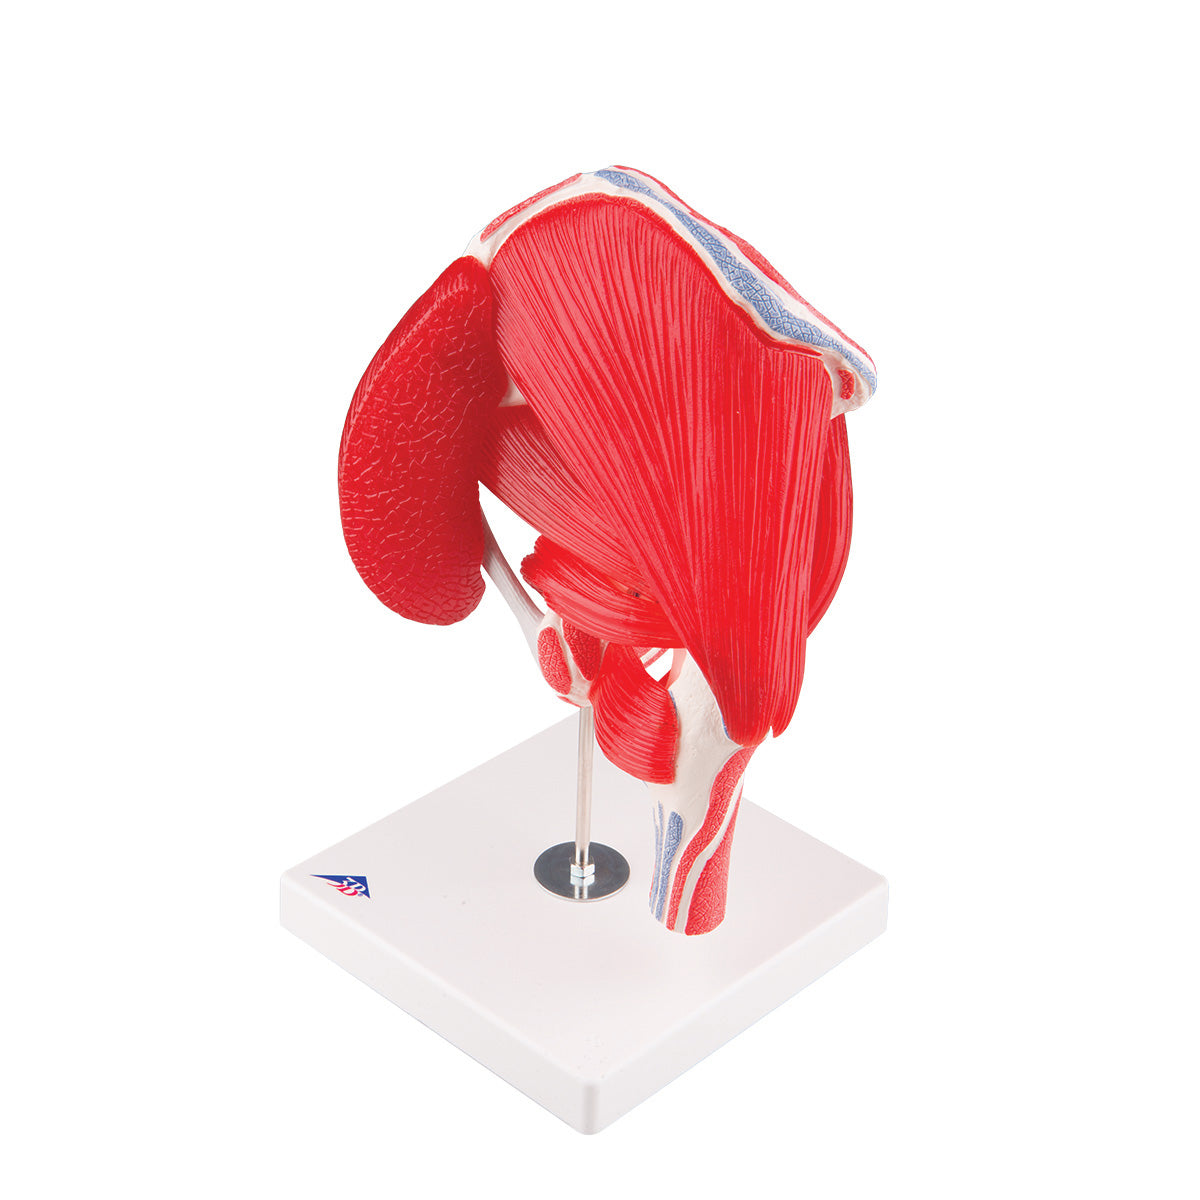 Flexible hip model with muscles that can be separated into 7 parts